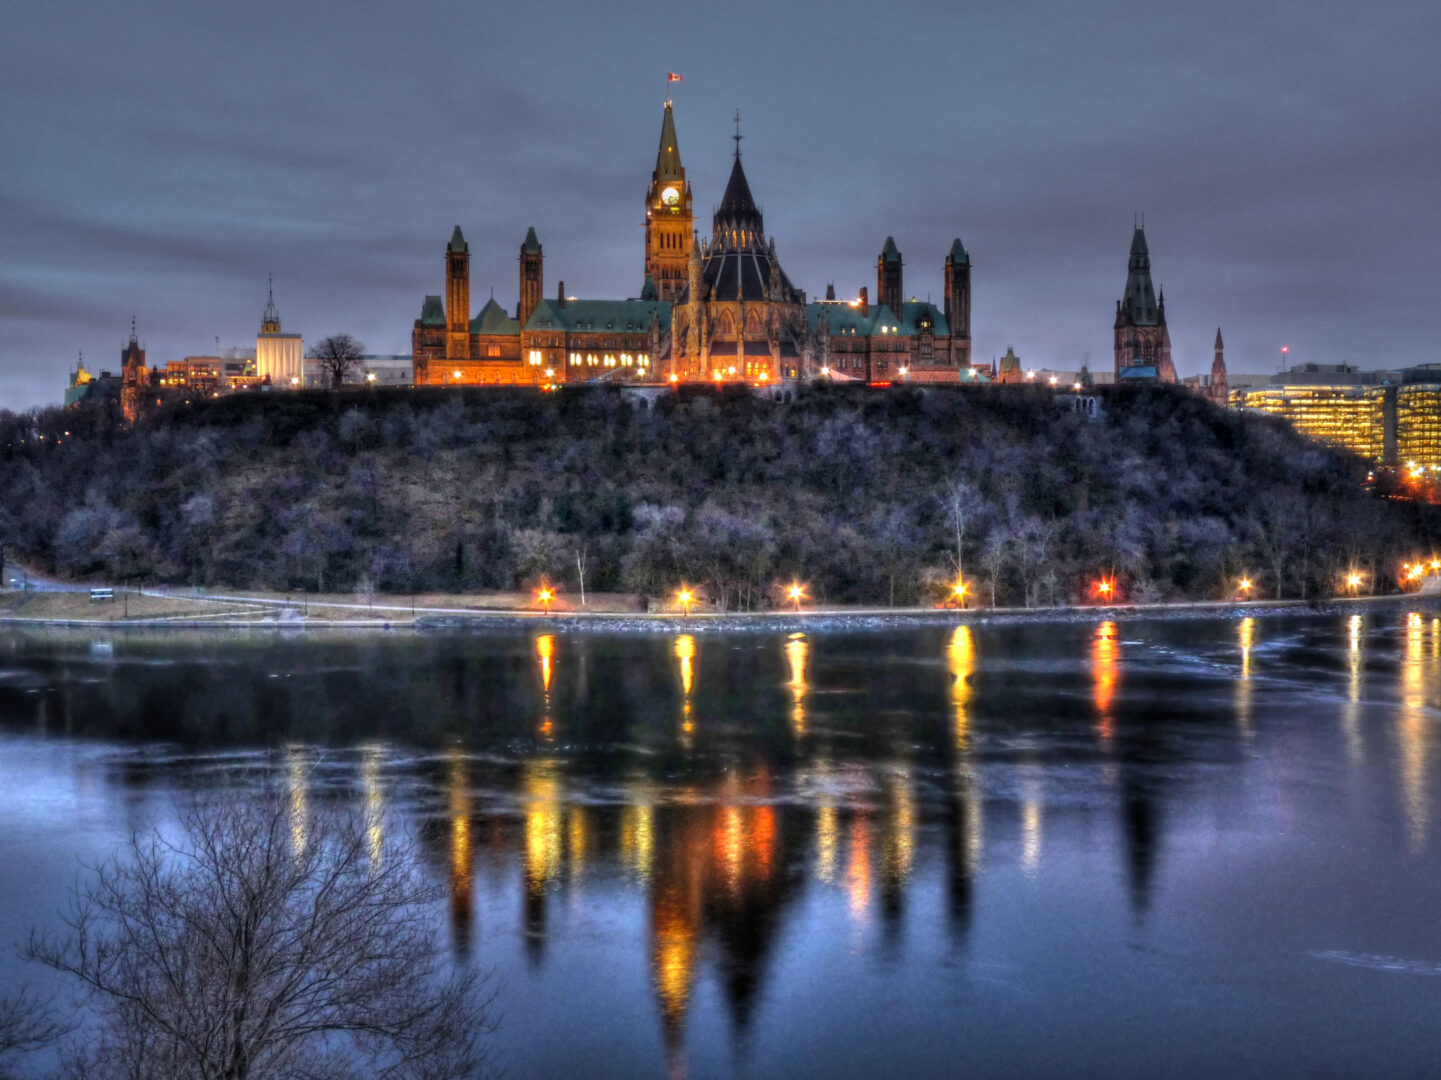 Parliament Hill is lit up at dusk. The water around reflects the building's lights.